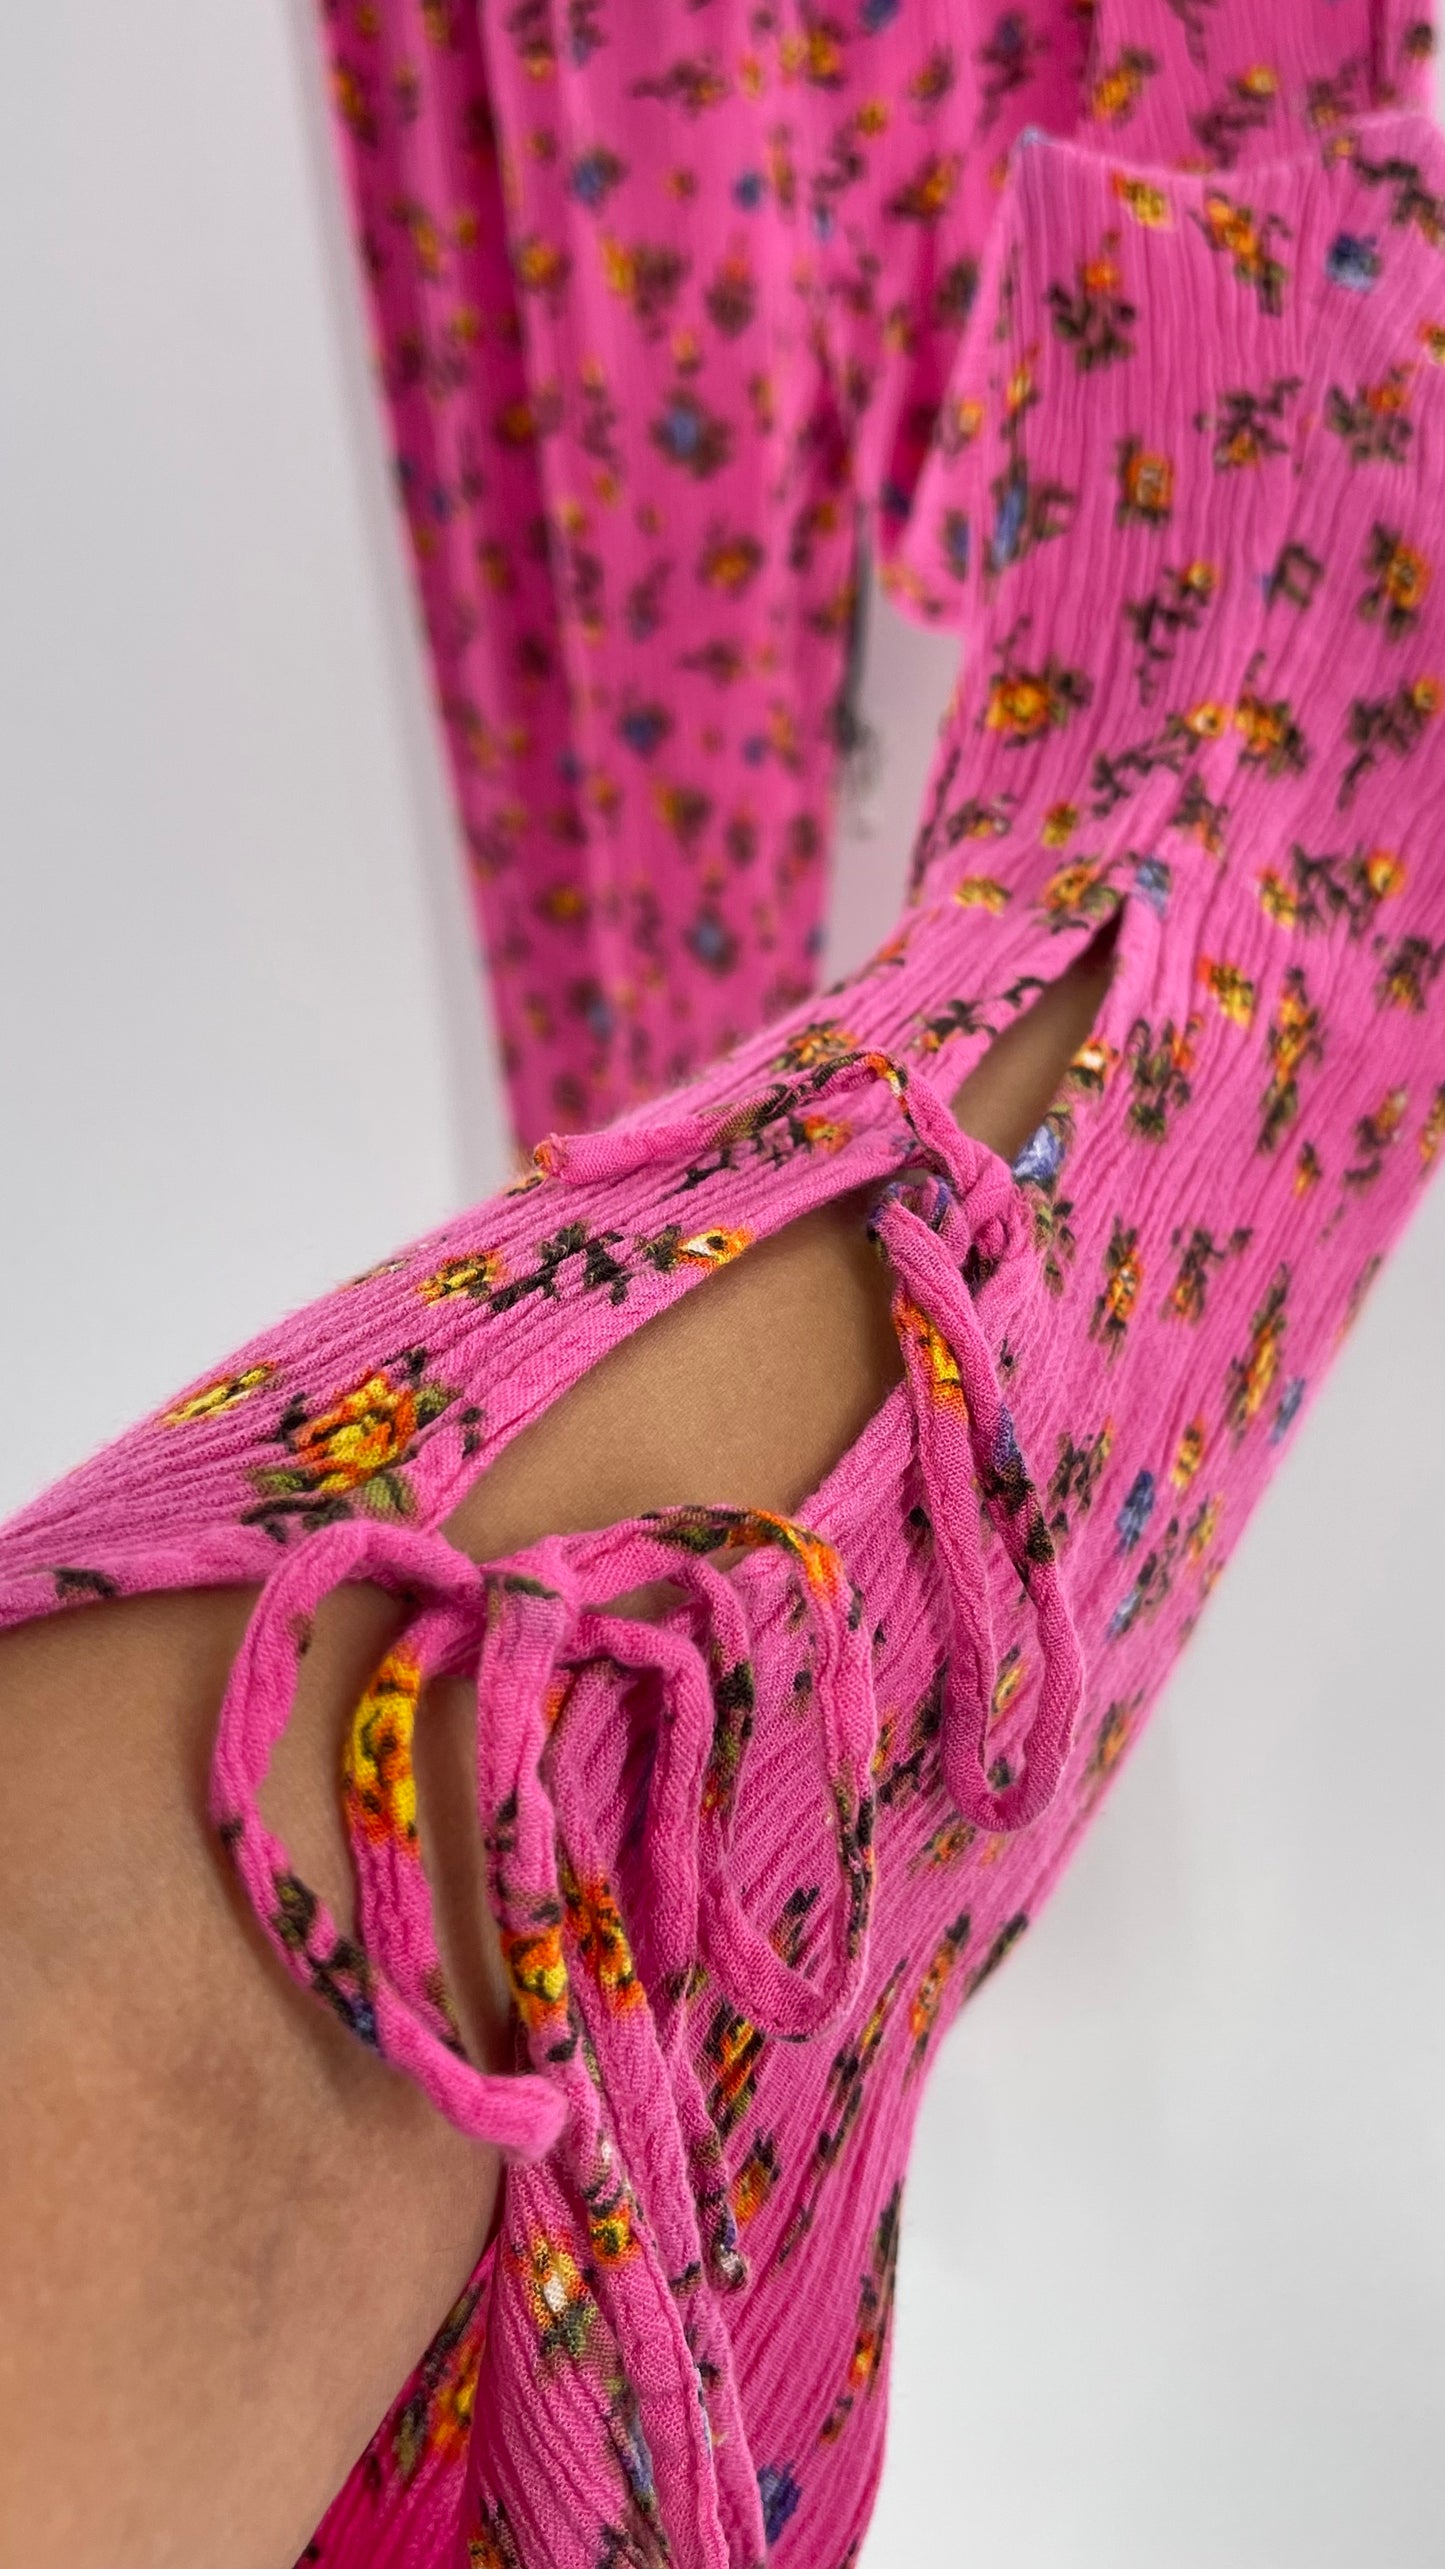 Urban Outfitters Crimped Floral Flares with Tie Up Ankle Detailing (Small)